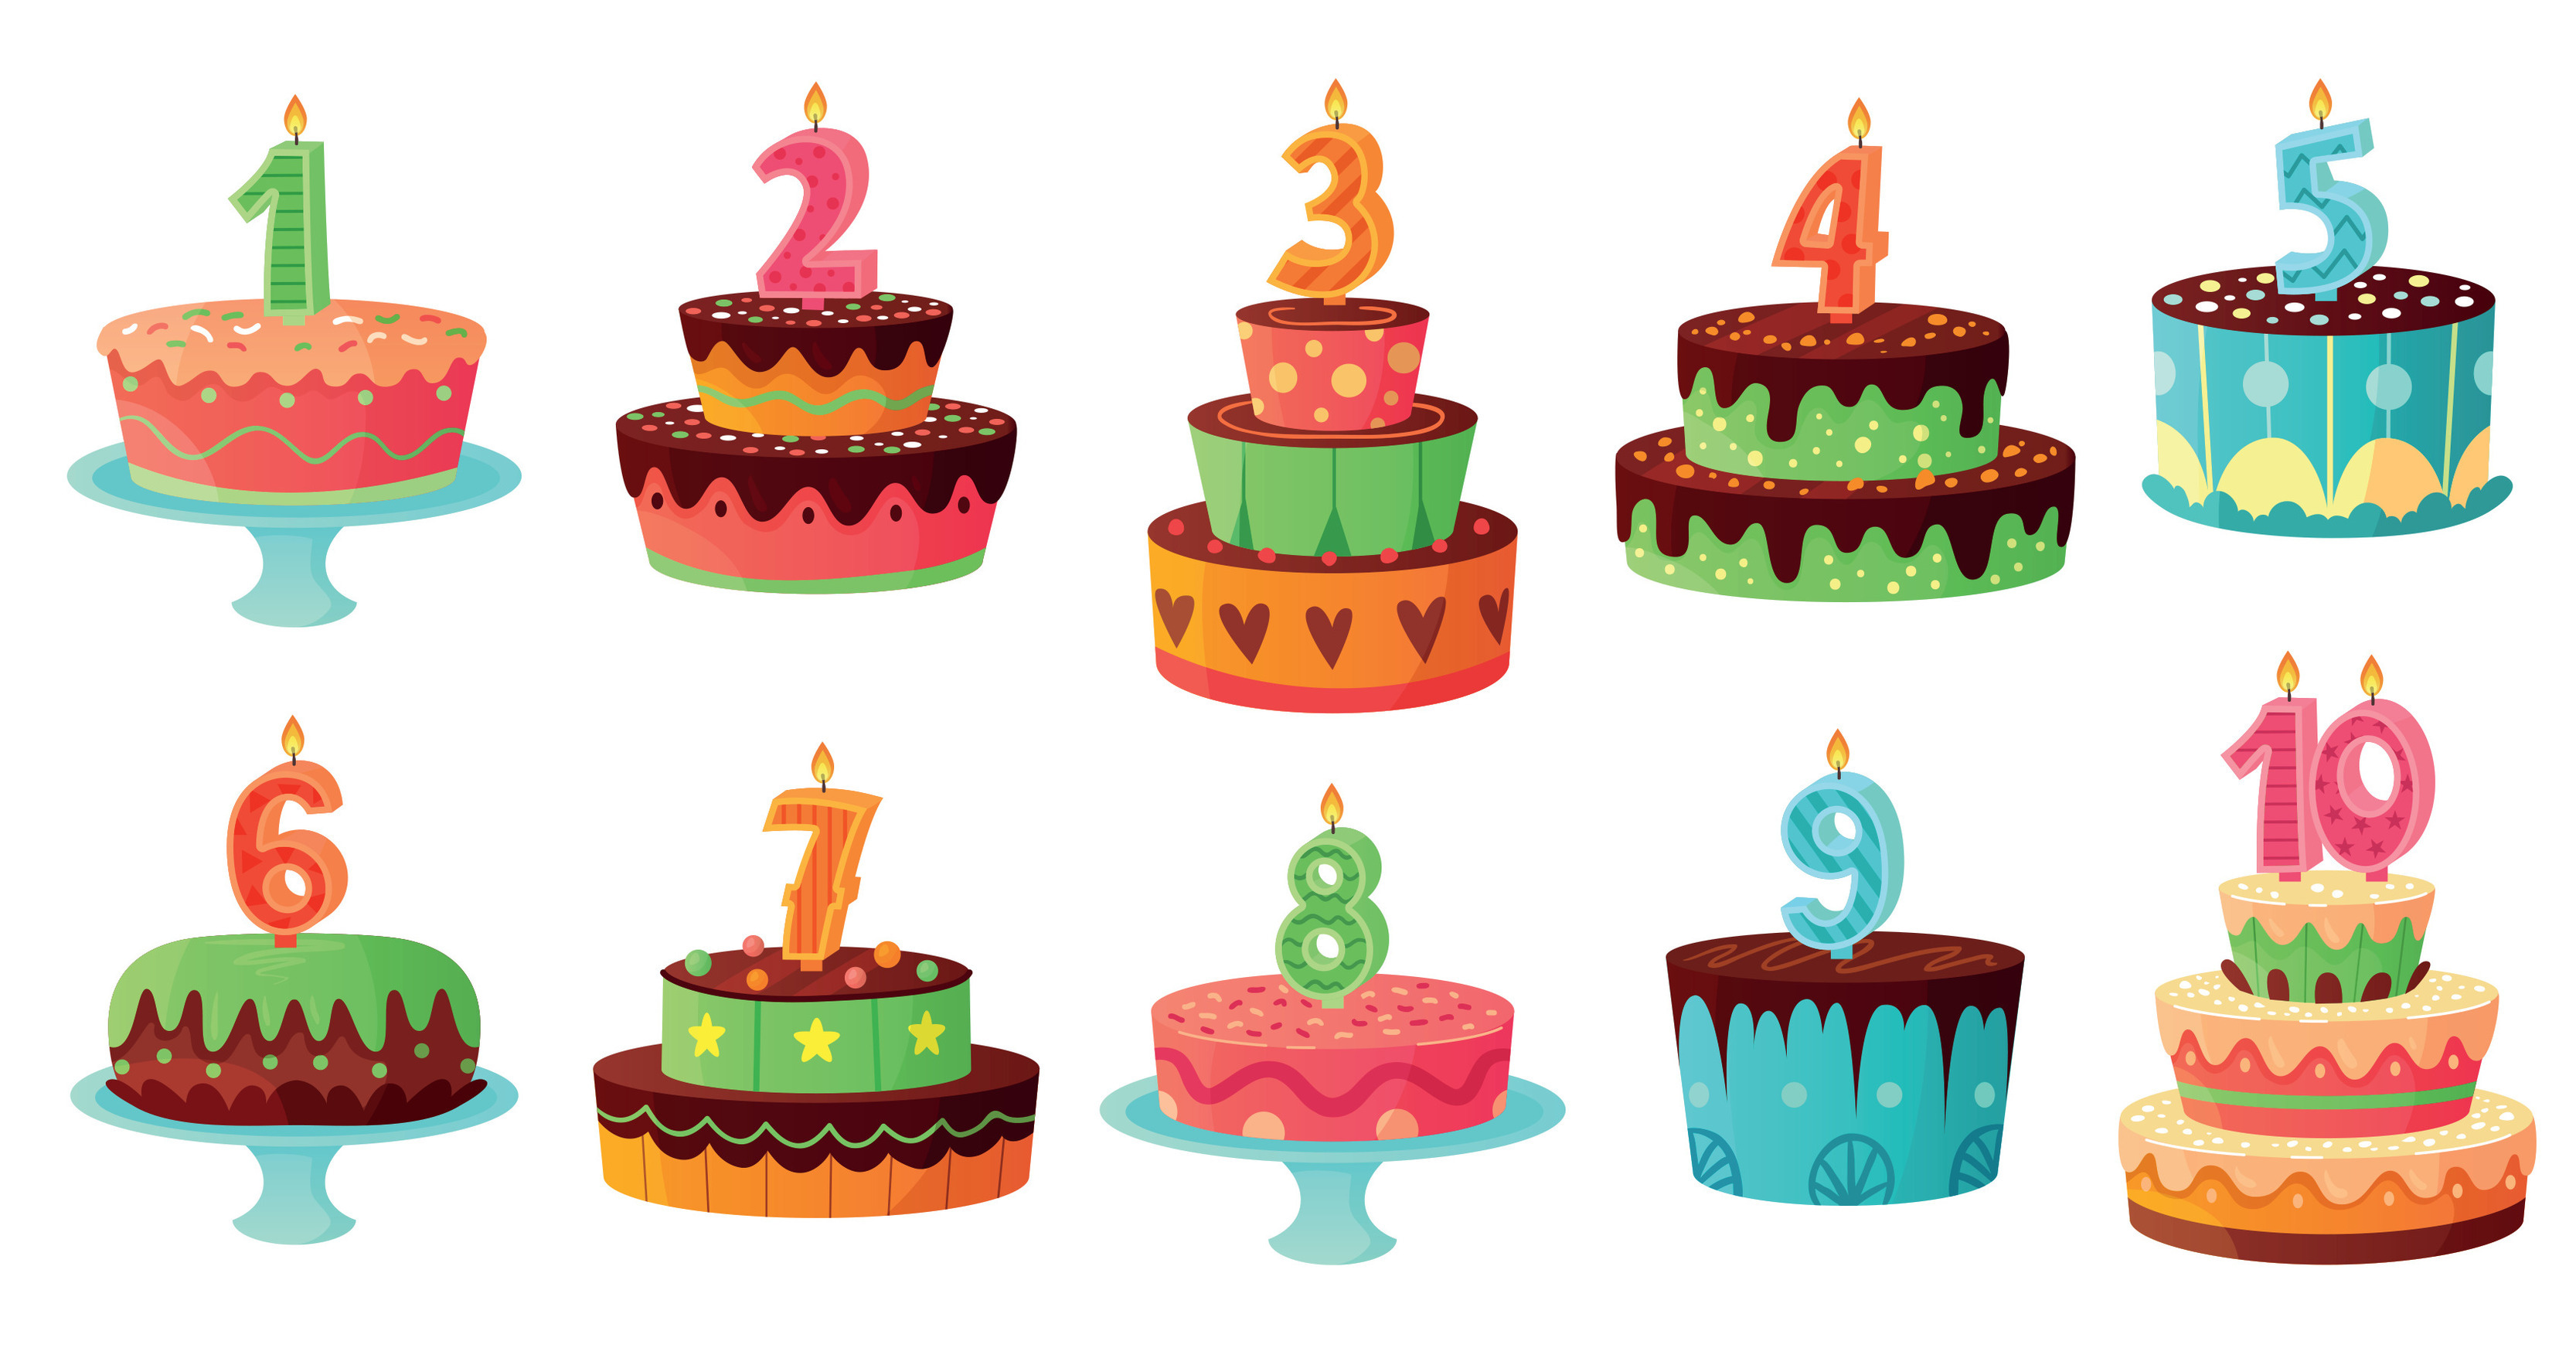 Cake With Lots Of Birthday Candles Animation GIF | GIFDB.com